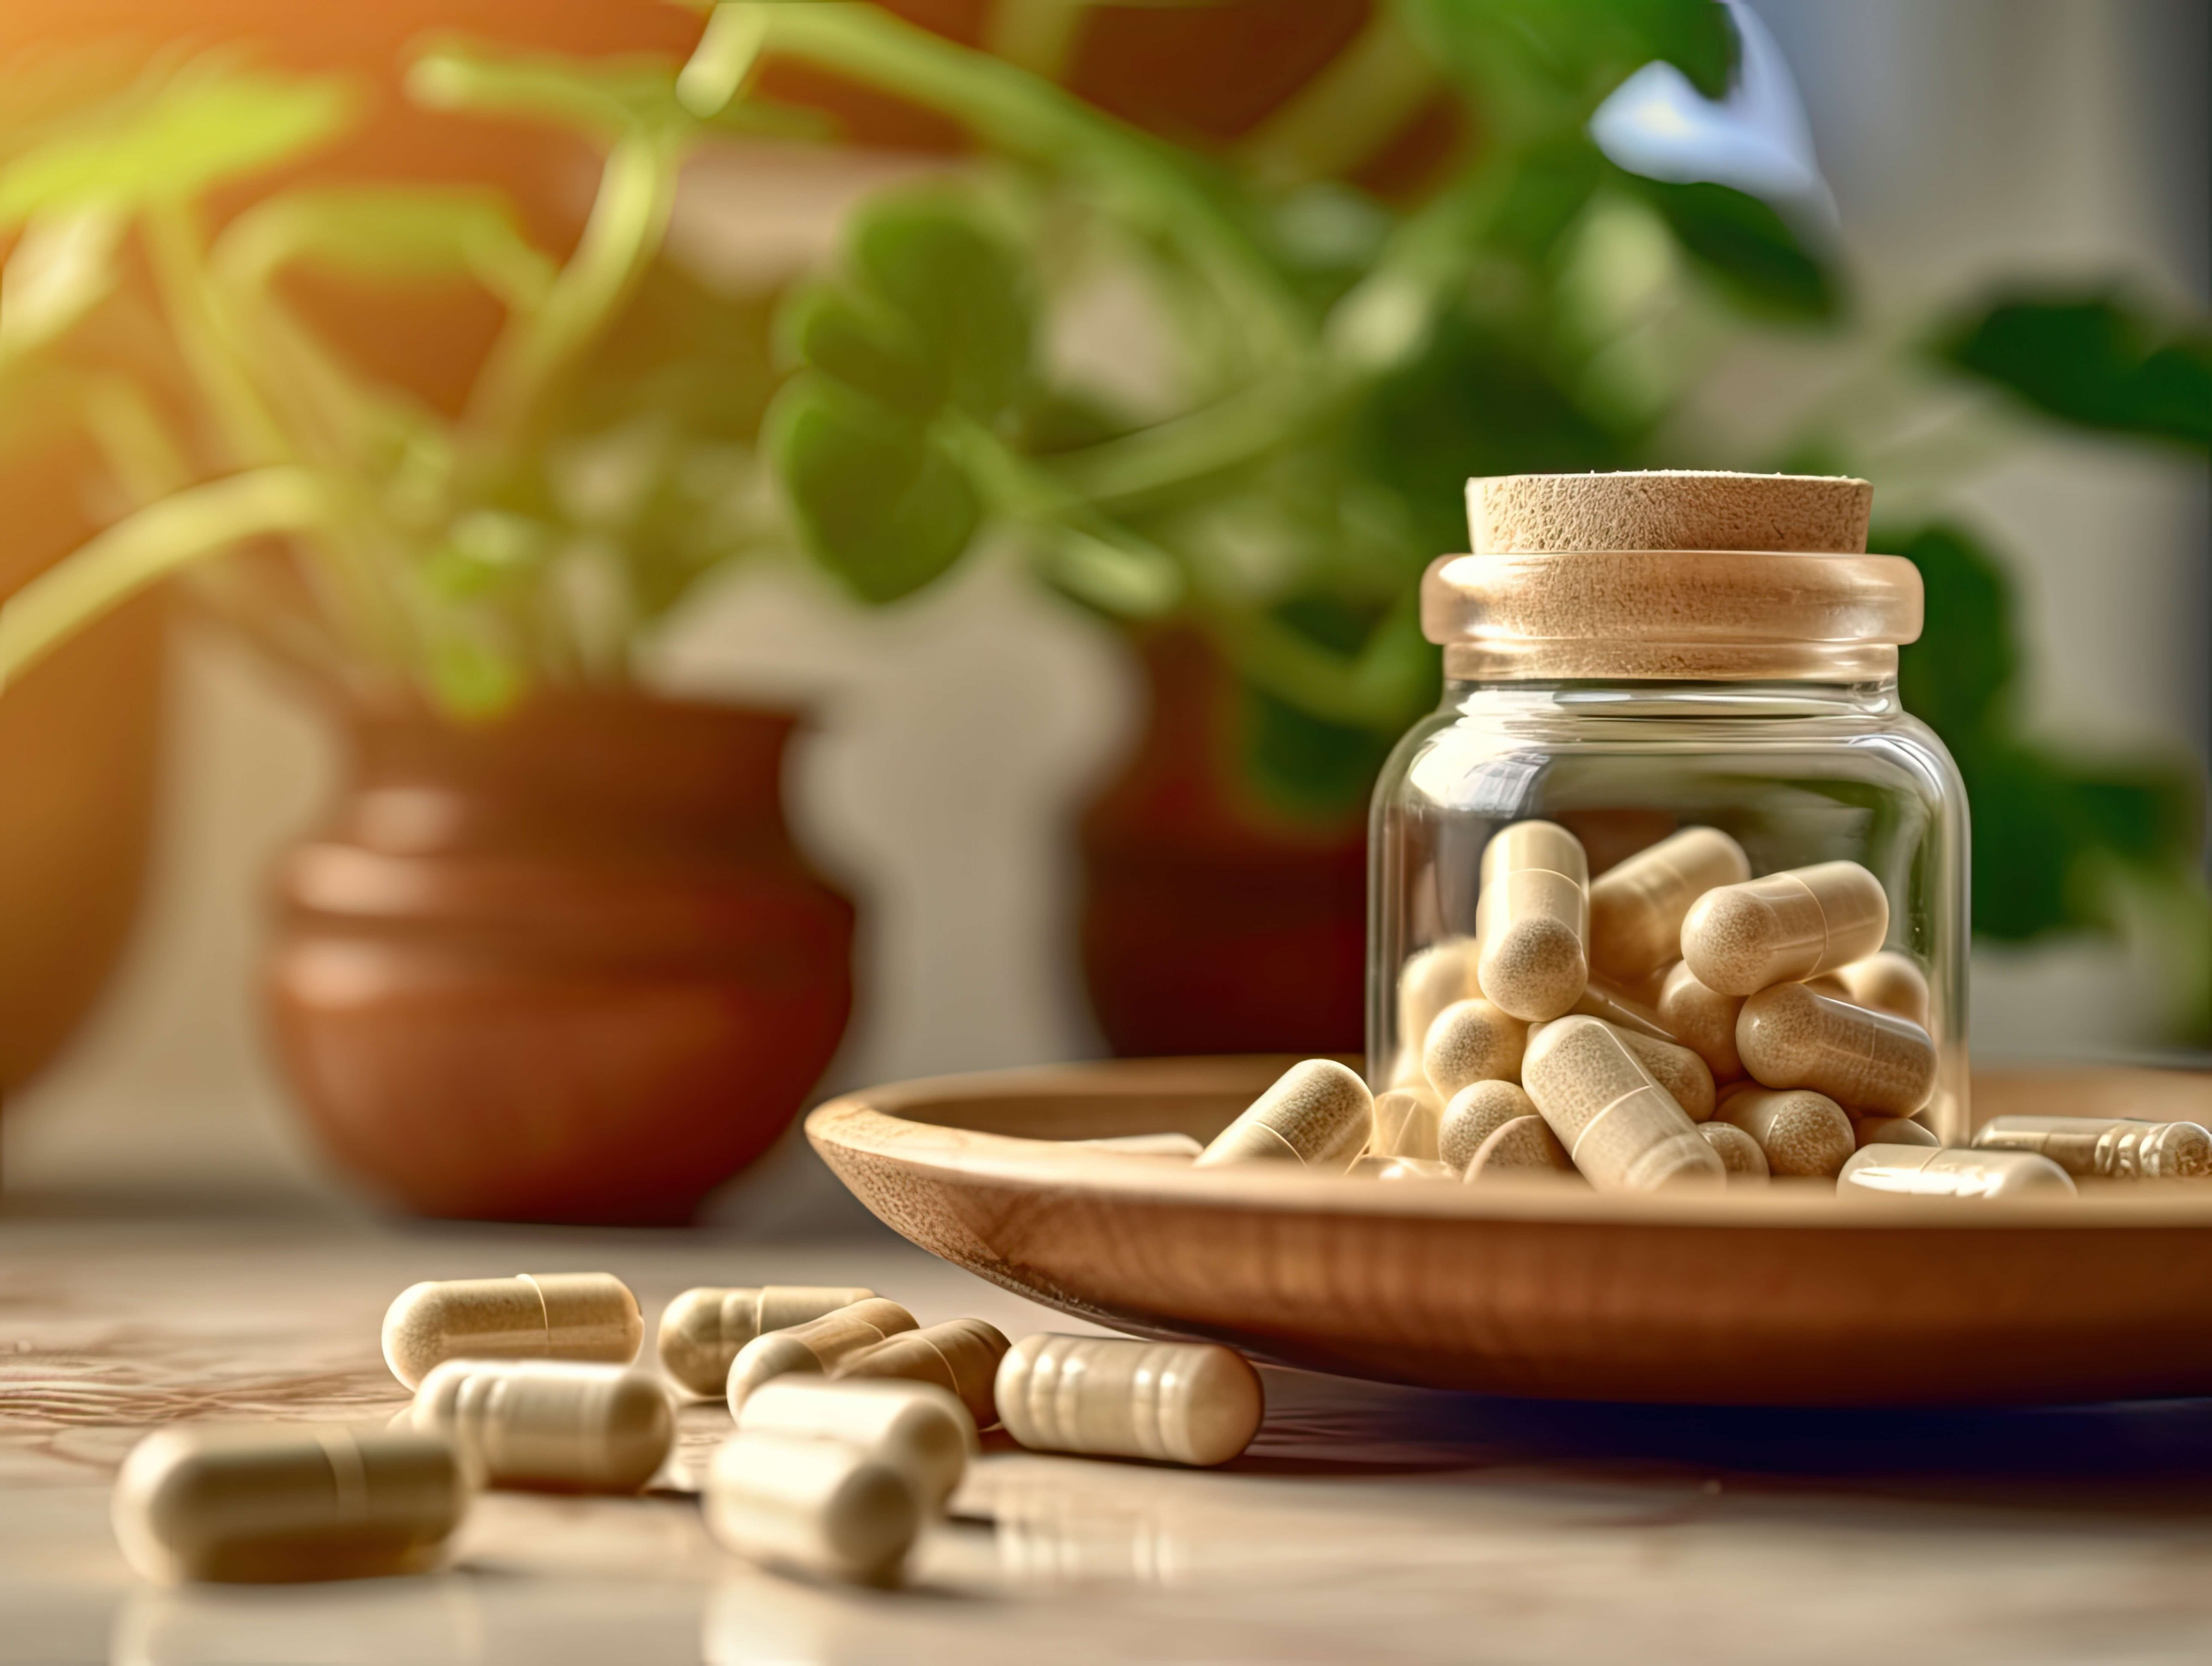 Ashwaganda supplements in and around a clear glass jar featuring a cork lid. In the background is a leafy green plant.